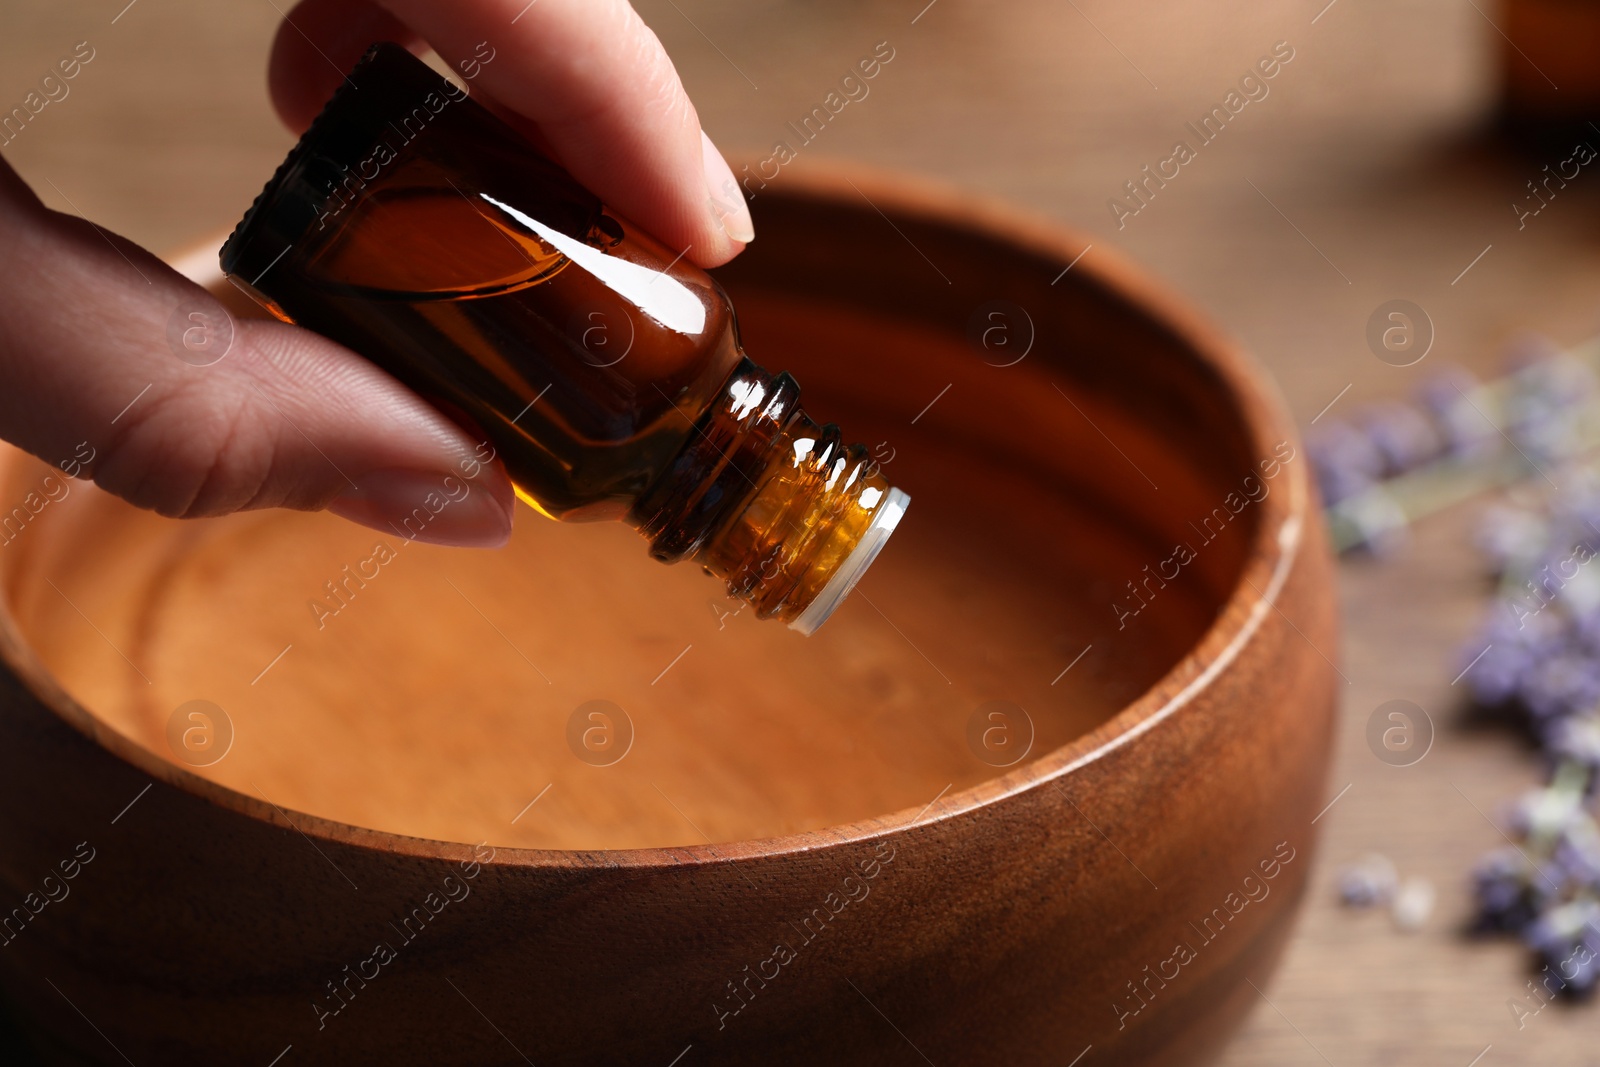 Photo of Woman dripping lavender essential oil from bottle into wooden bowl at table, closeup